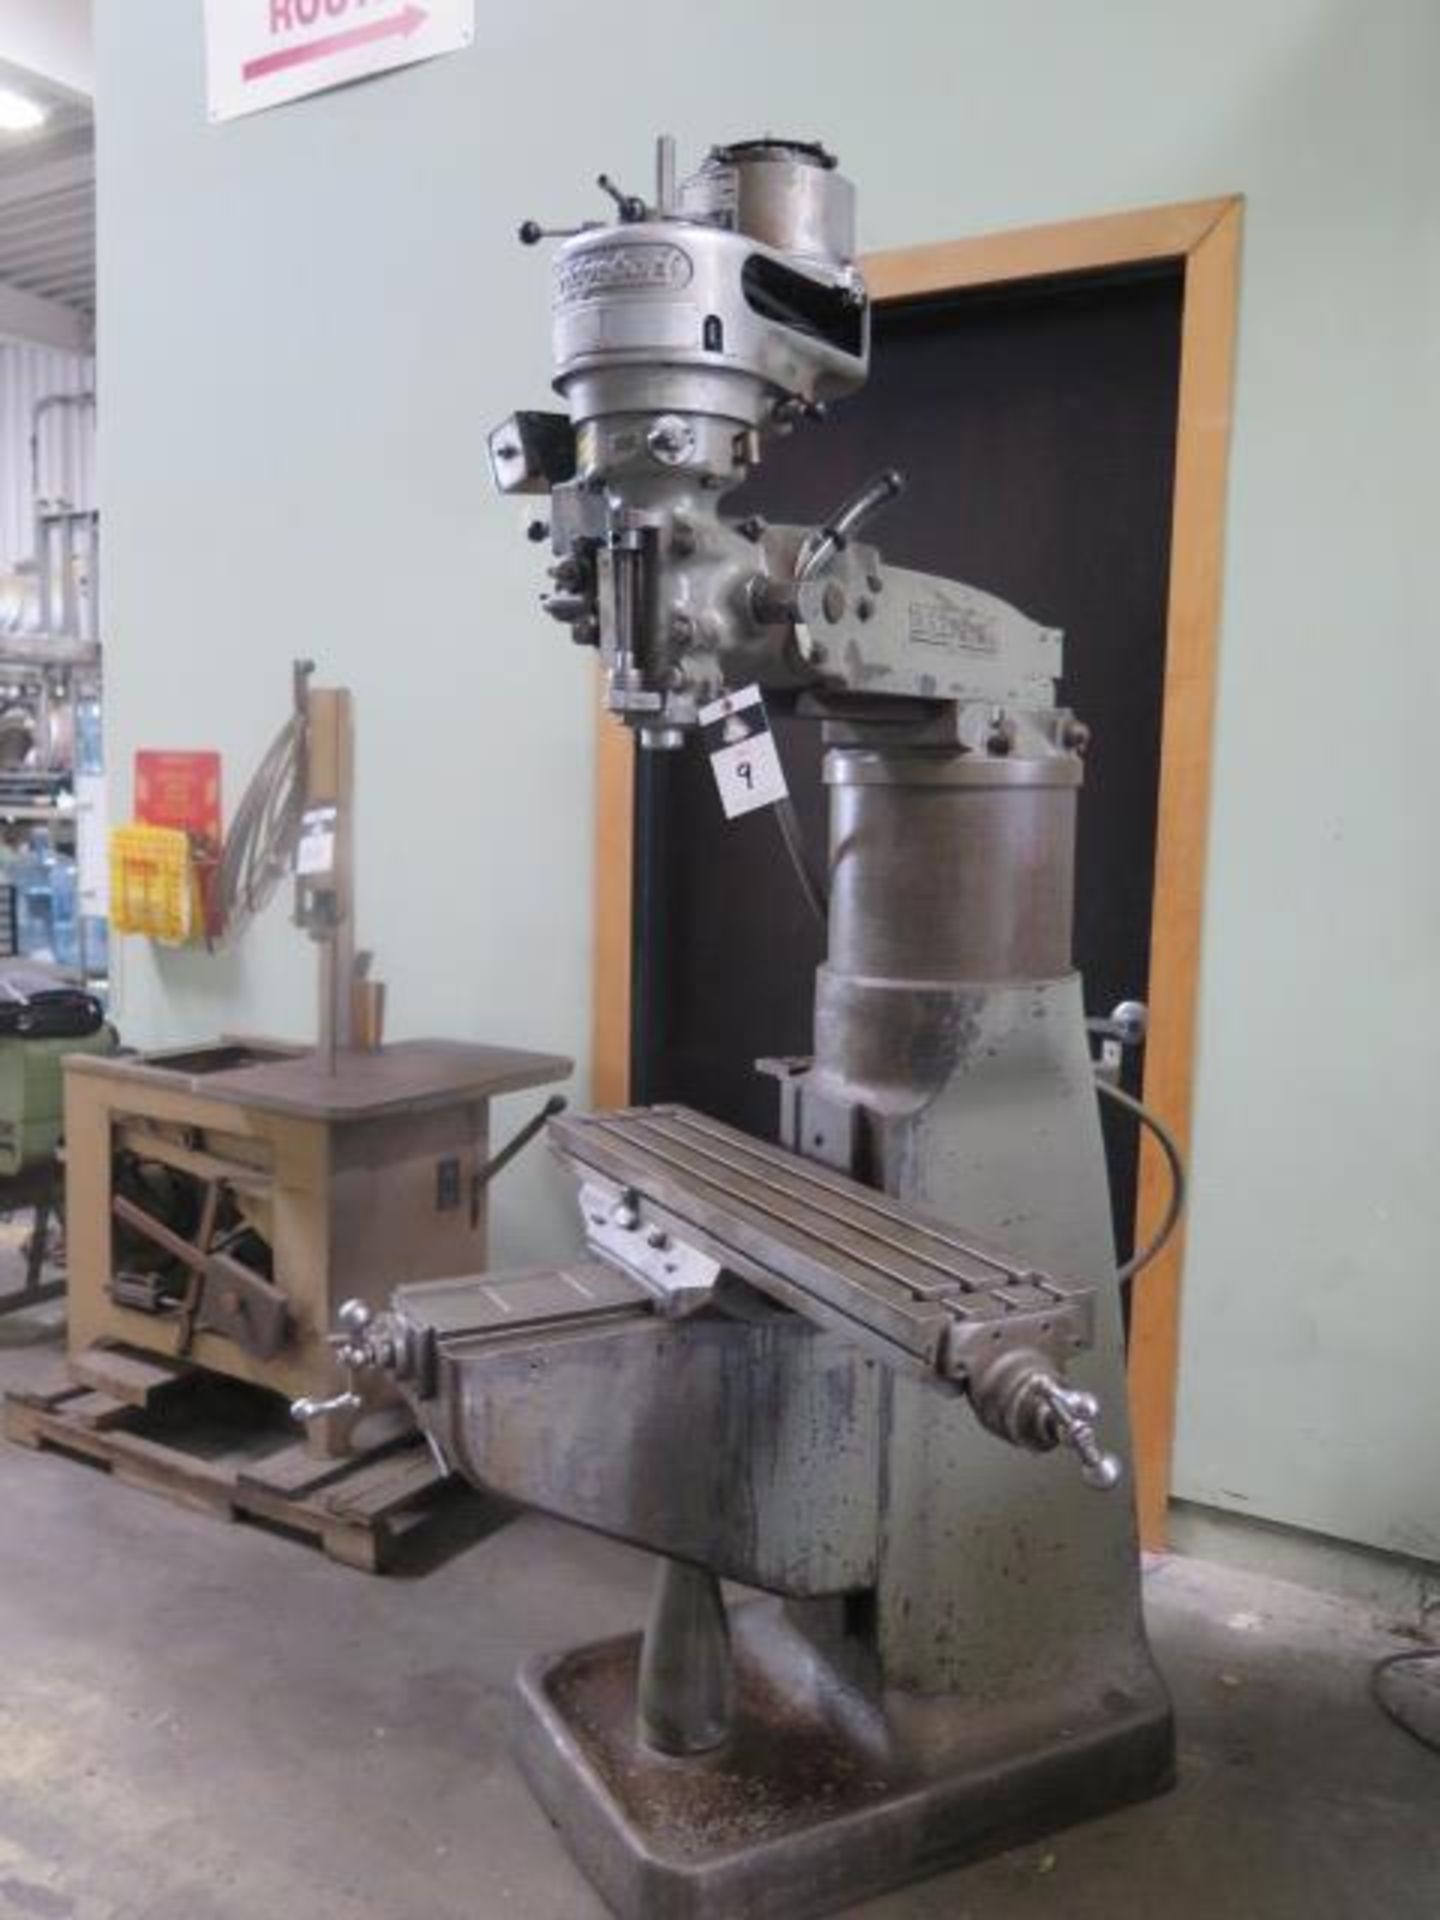 Bridgeport Vertical Mill w/ 1Hp Motor, 80-2720 RPM, 8-Speeds, 11” Riser, 9” x 42” Table SOLD AS IS - Image 2 of 11